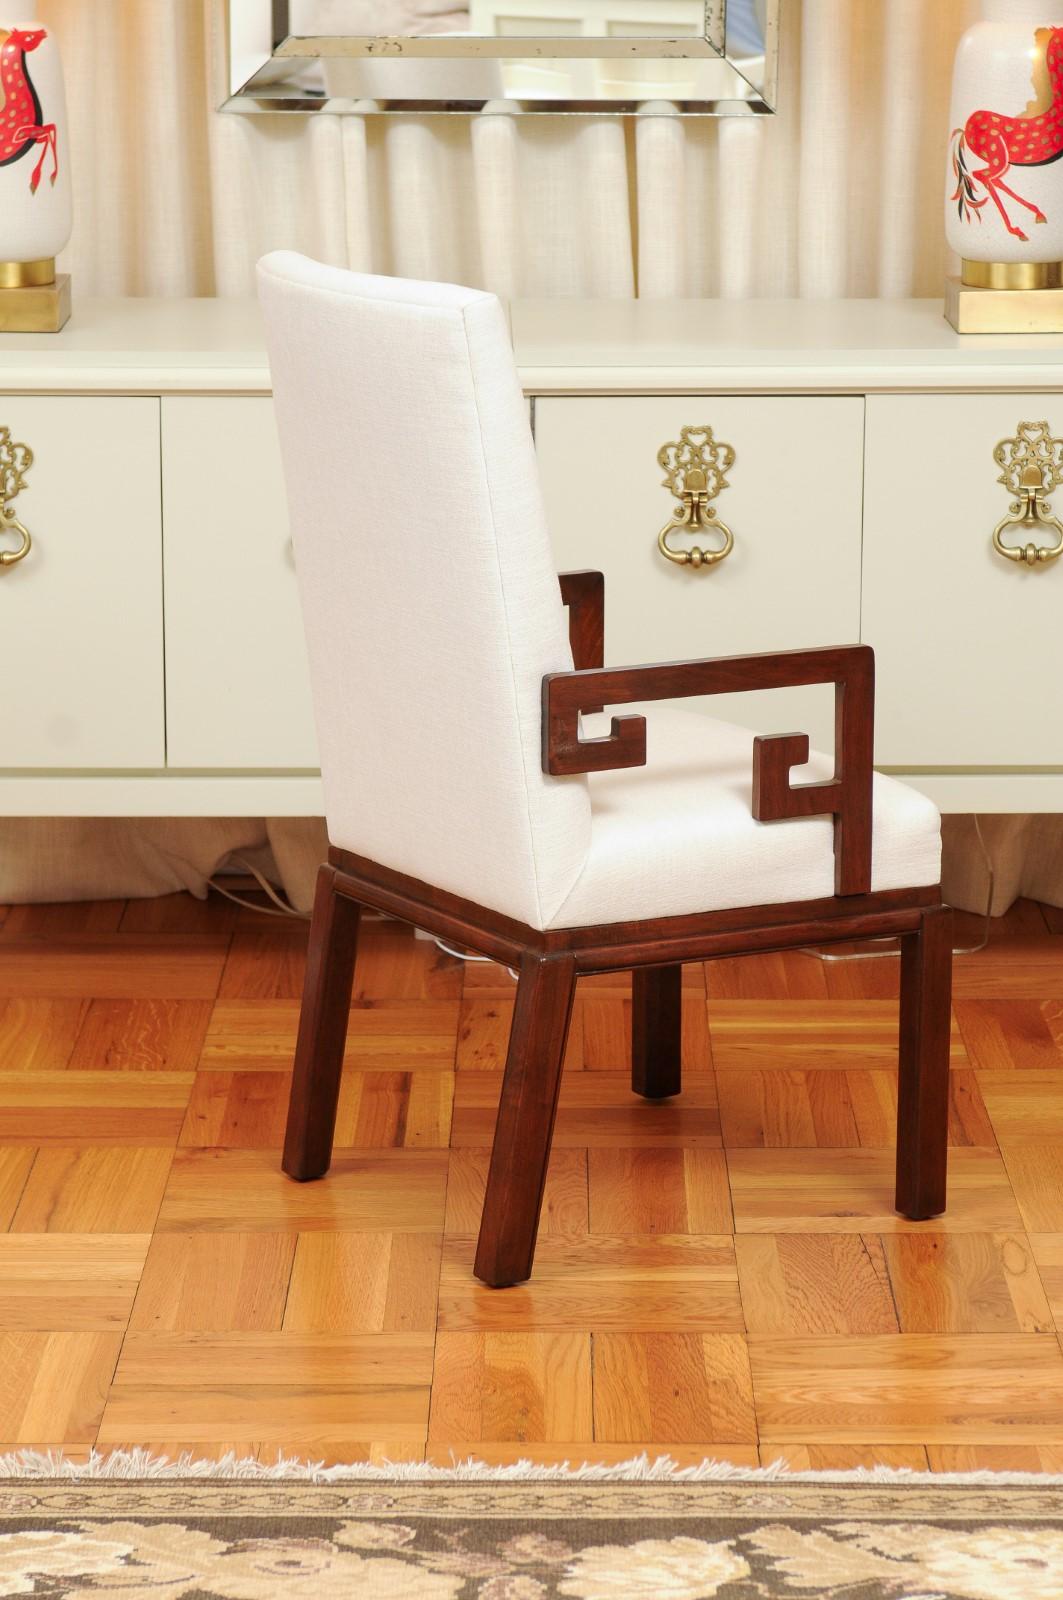 All Arms, Sublime Set of 16 Greek Key Chairs by Michael Taylor, circa 1970 For Sale 1